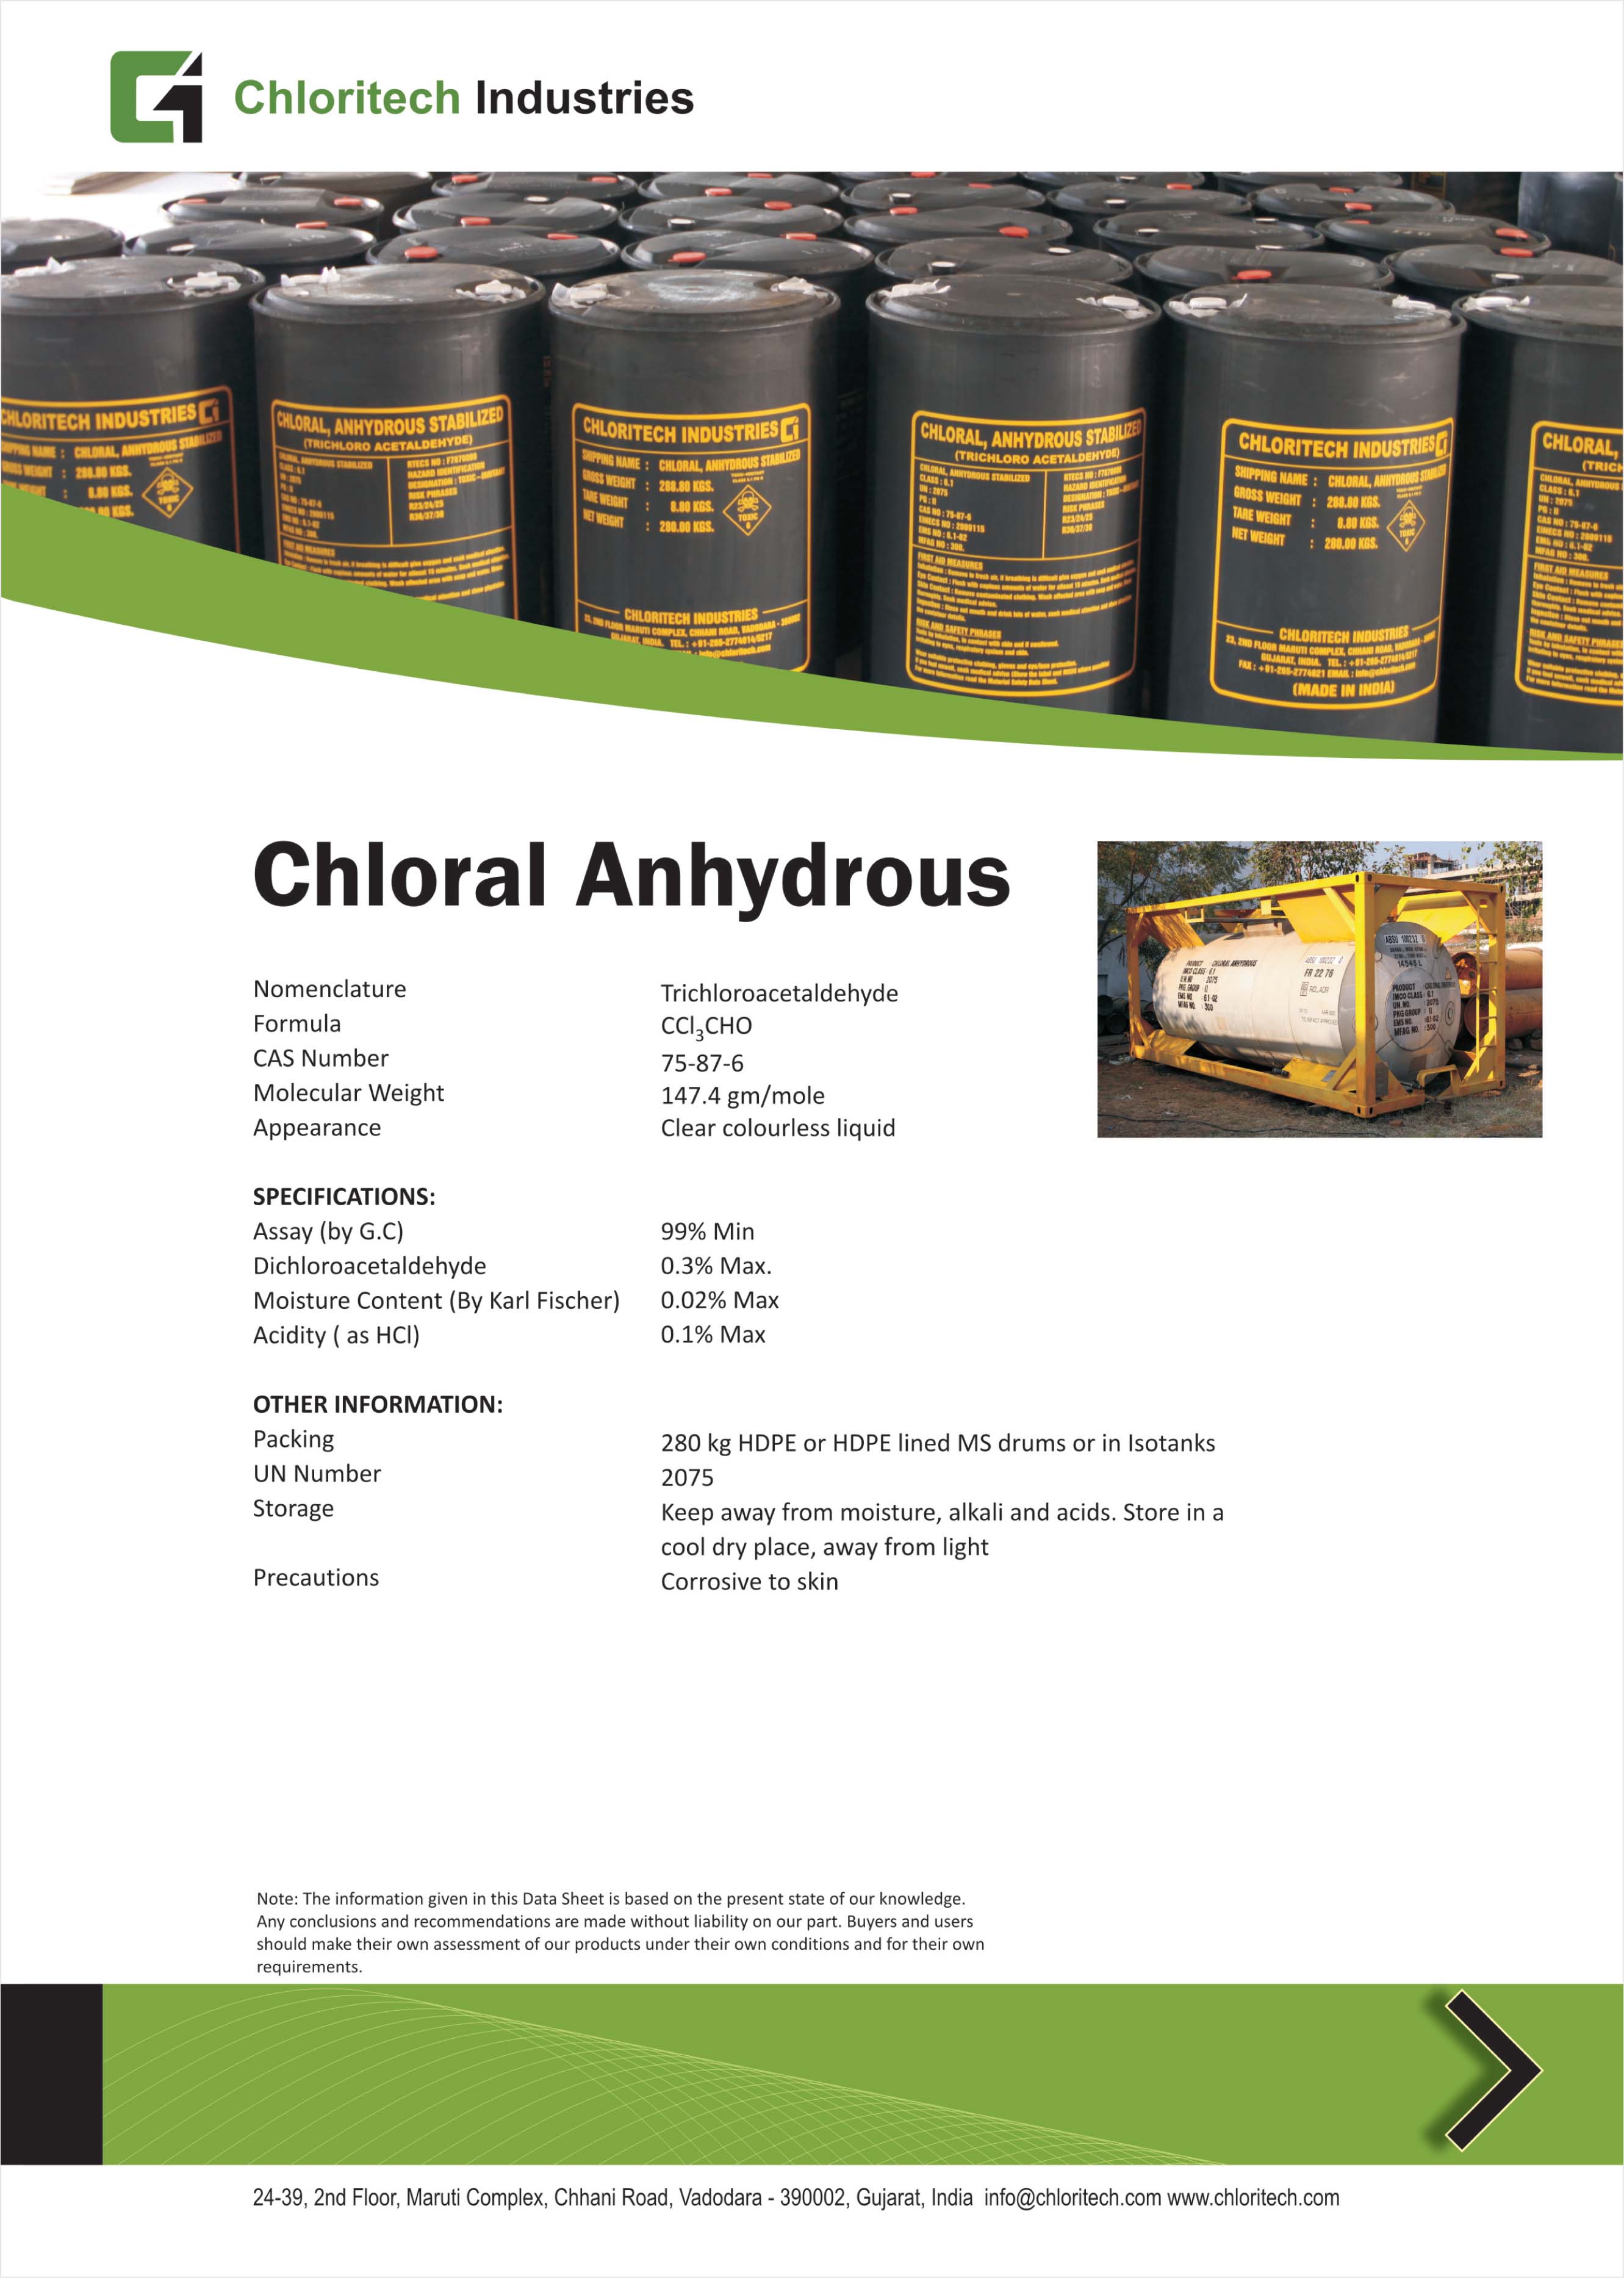 Chloral Anhydrous